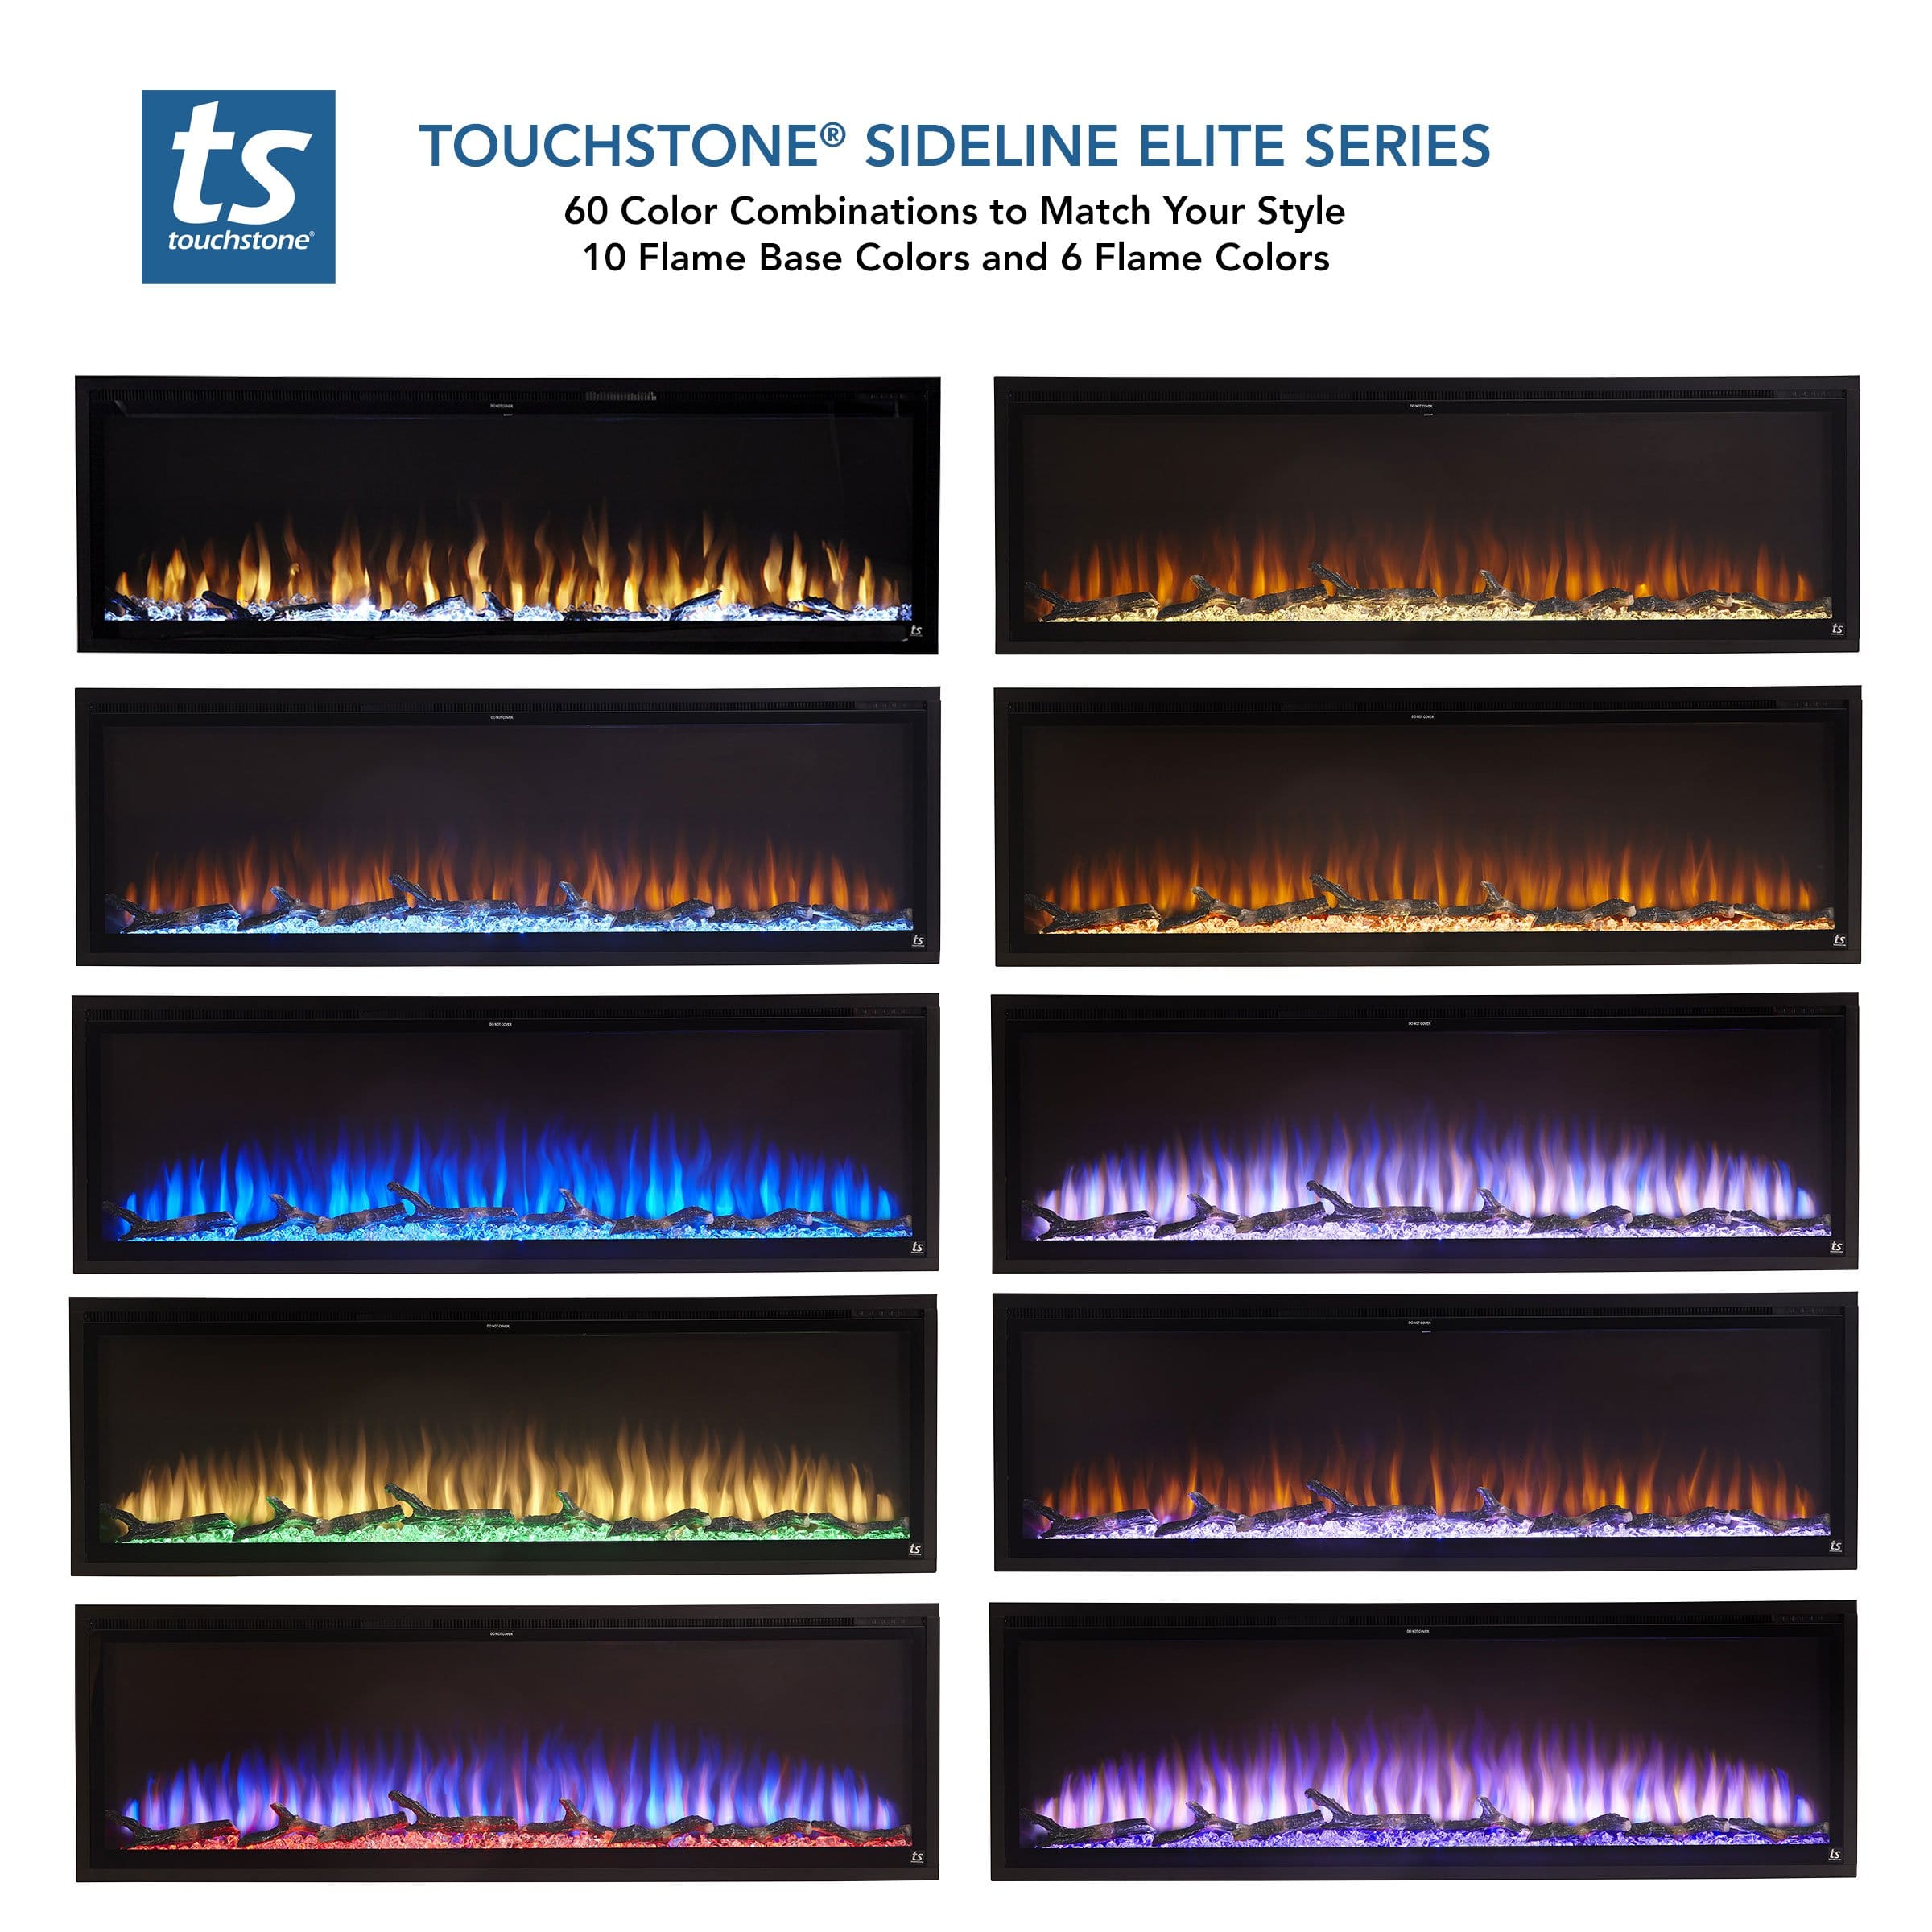 The Touchstone Sideline Elite Electric Fireplace features 60 flame color combinations